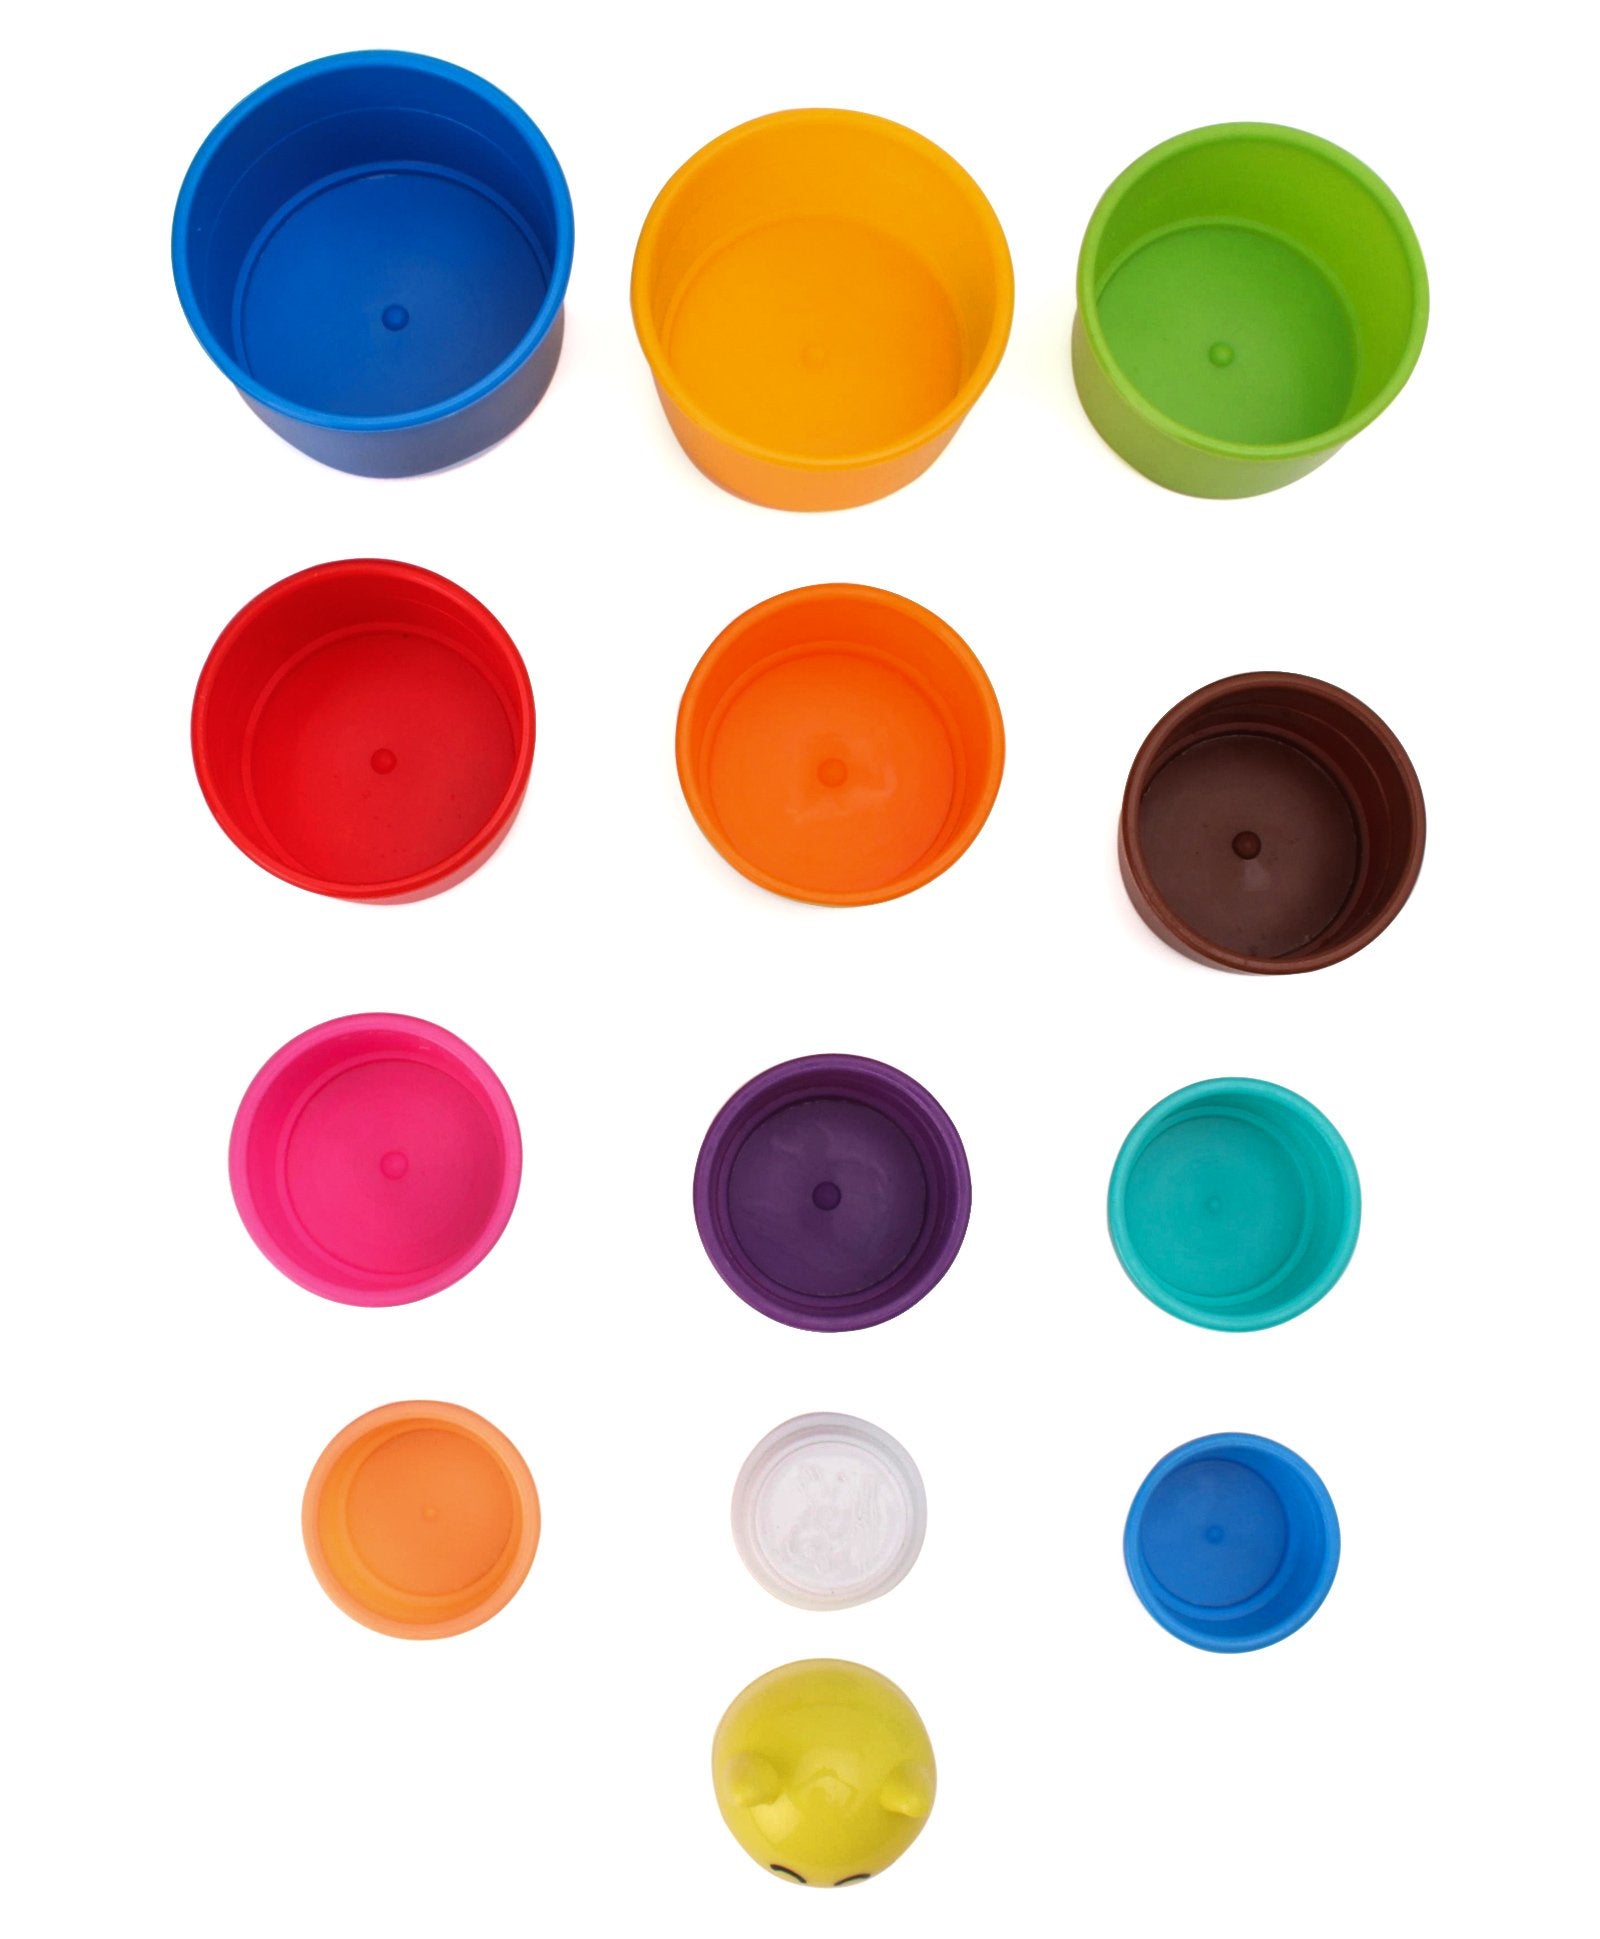 Petals Fair Stacking Cup Set - 13 Pieces (Colors May Vary)